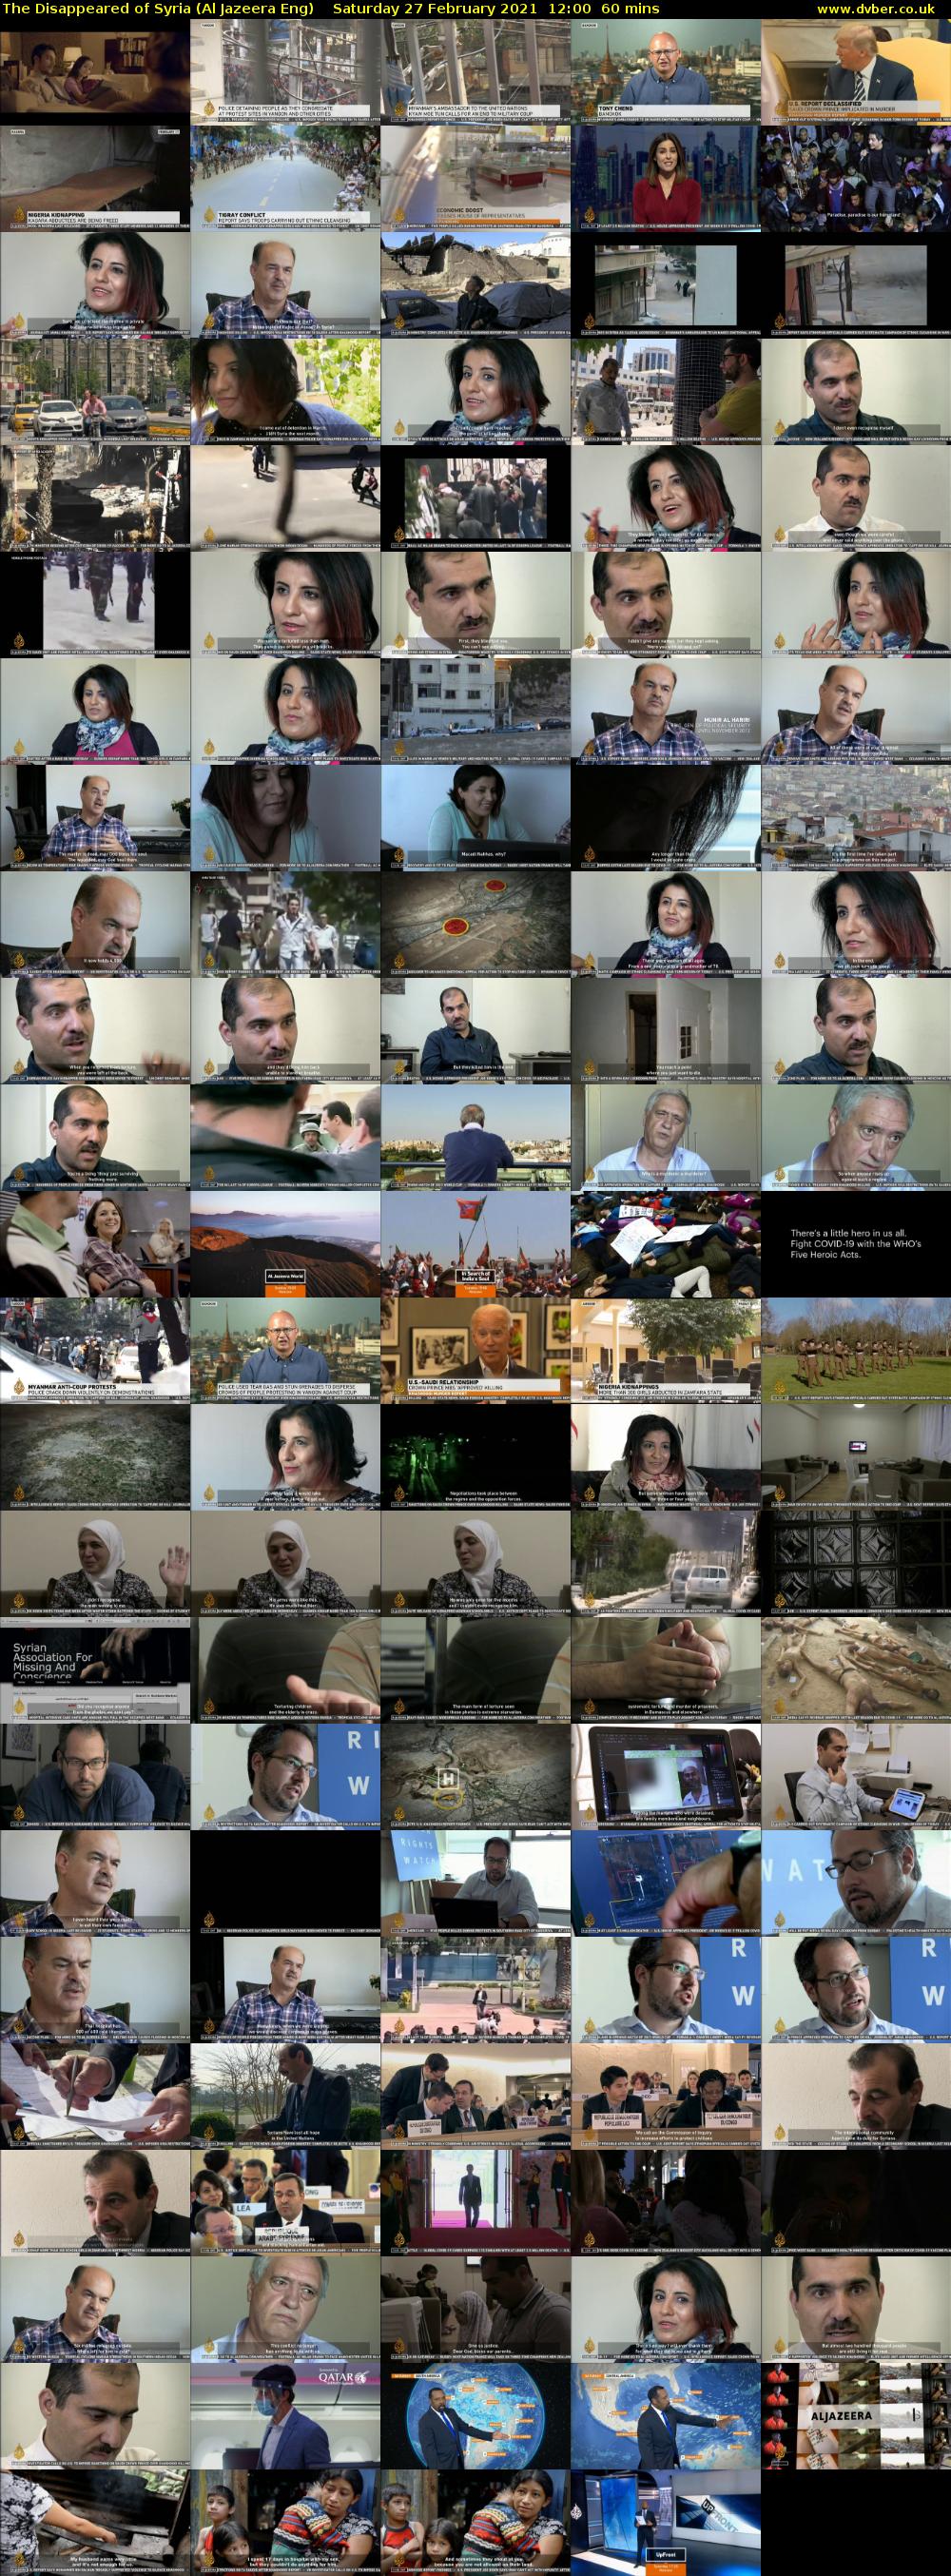 The Disappeared of Syria (Al Jazeera Eng) Saturday 27 February 2021 12:00 - 13:00